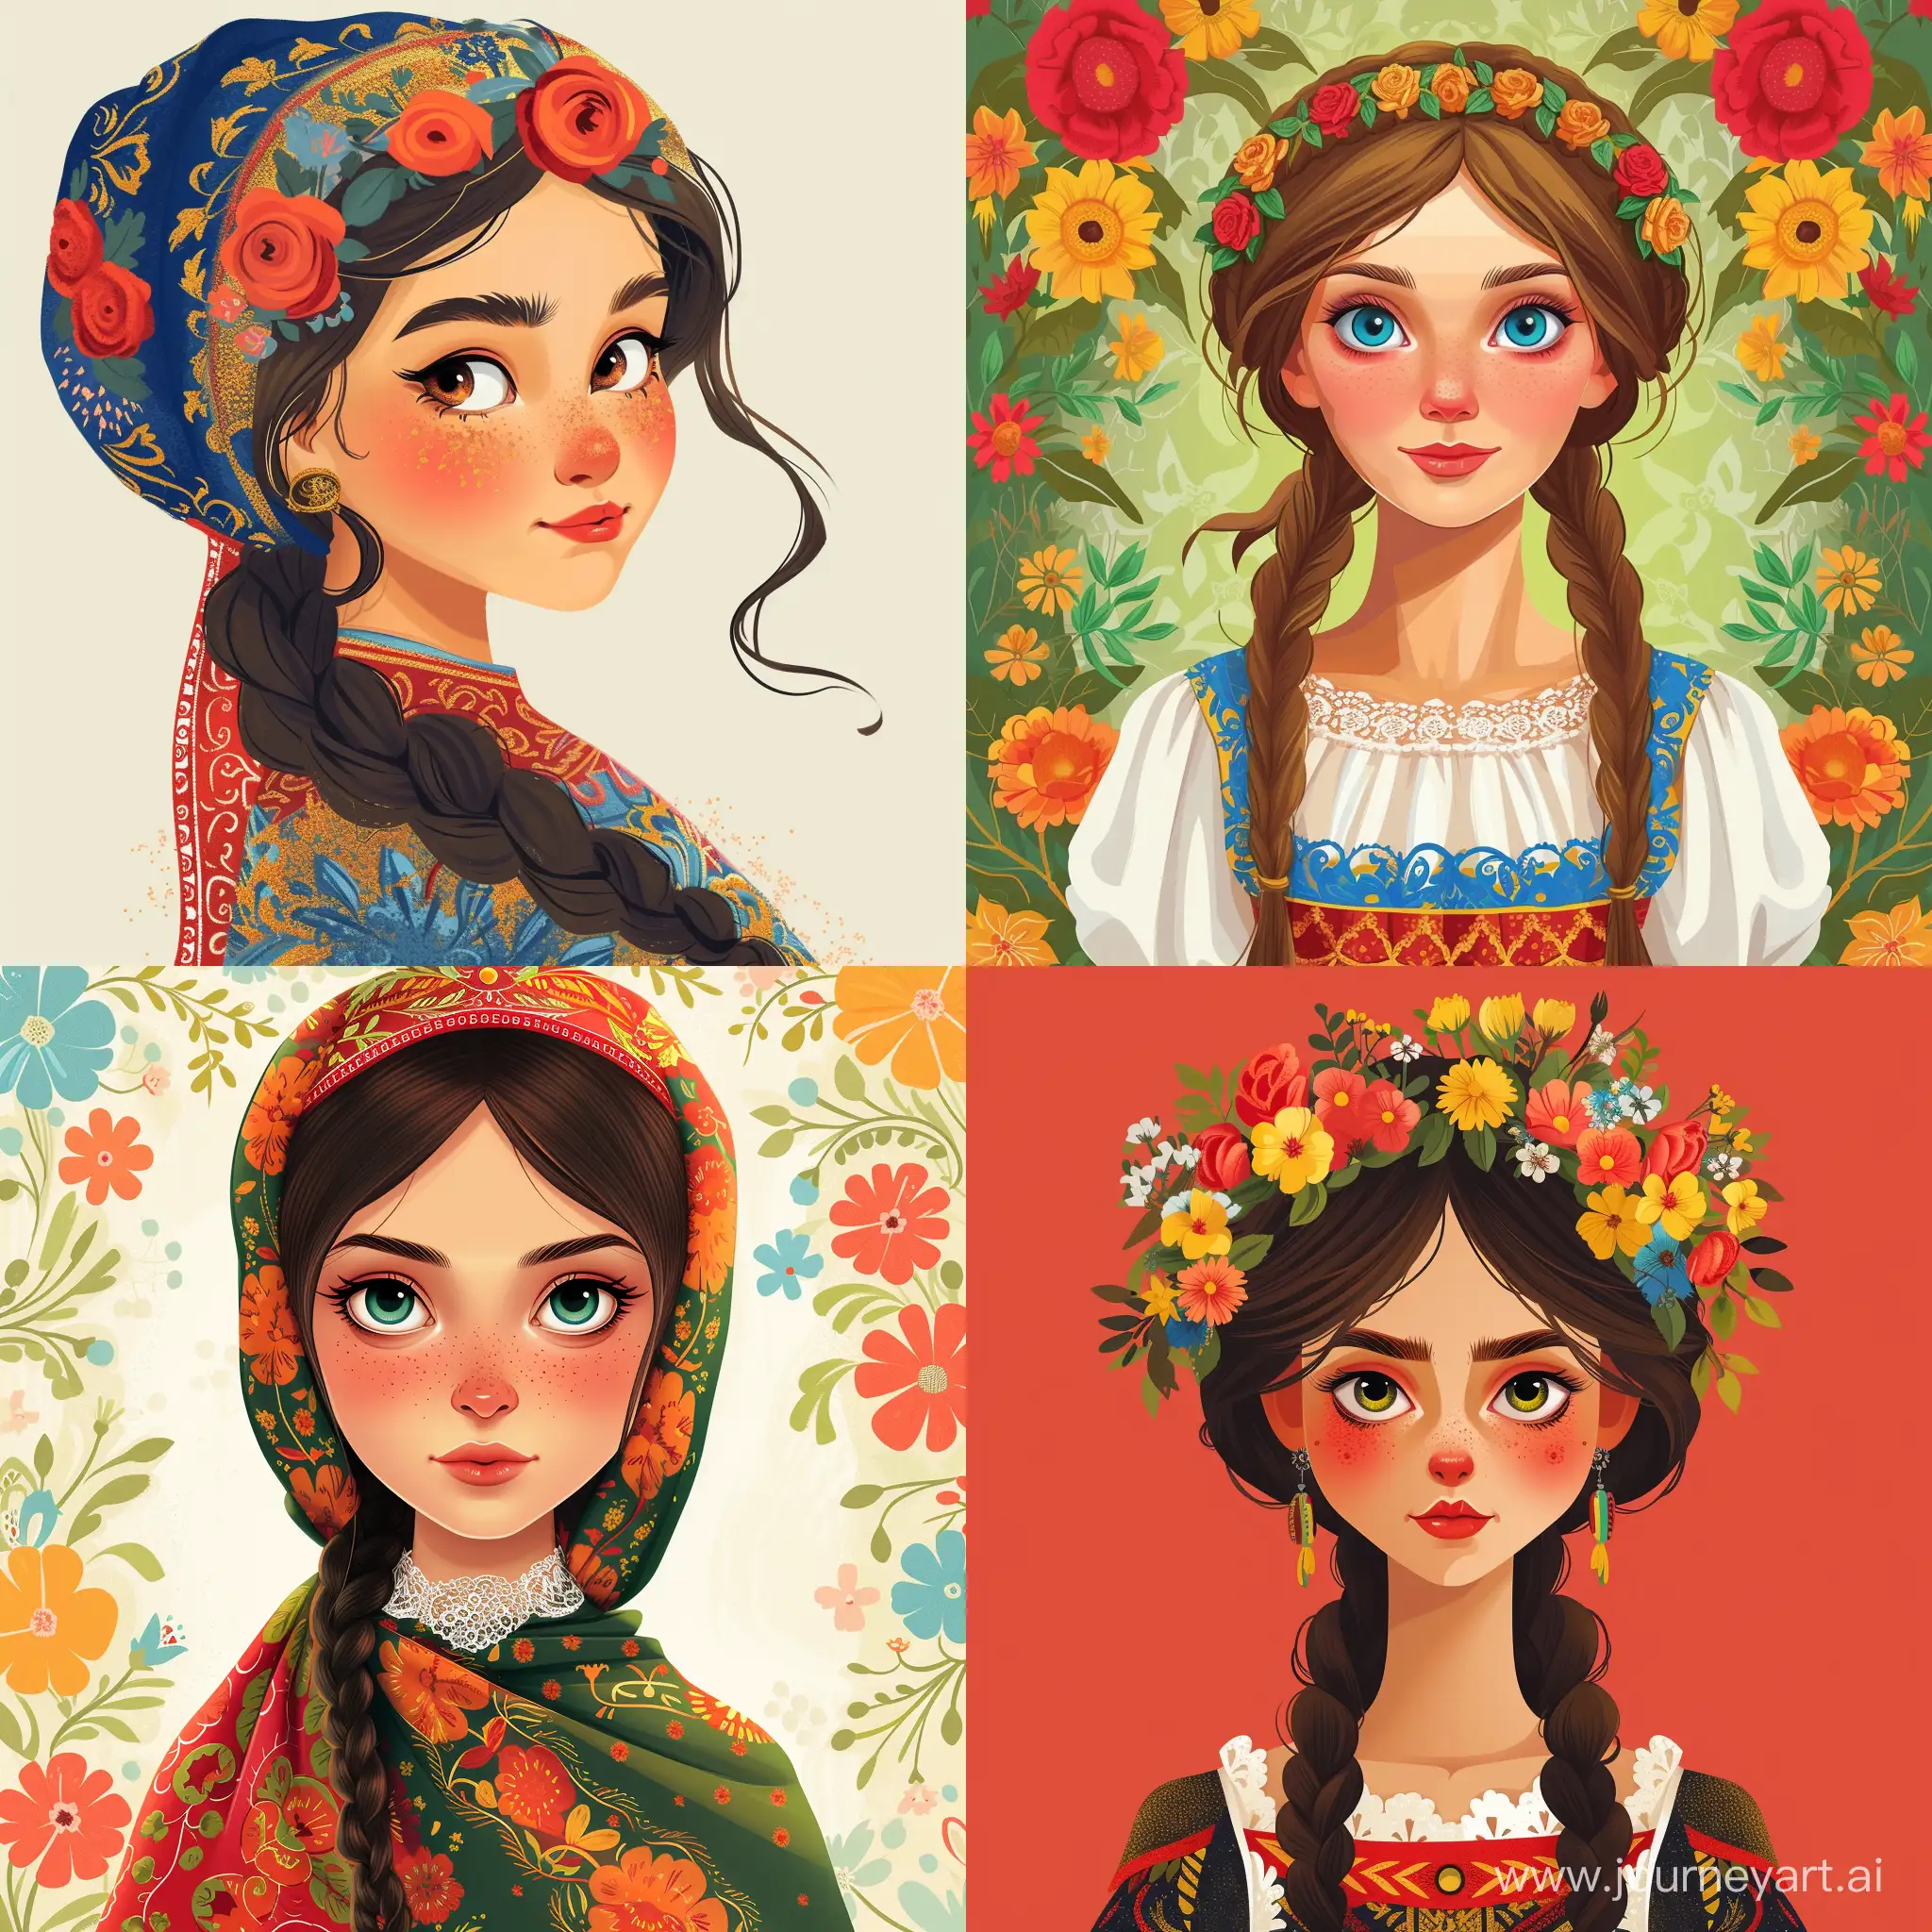 Russian-Girl-in-Disney-Style-Illustration-with-Traditional-Features